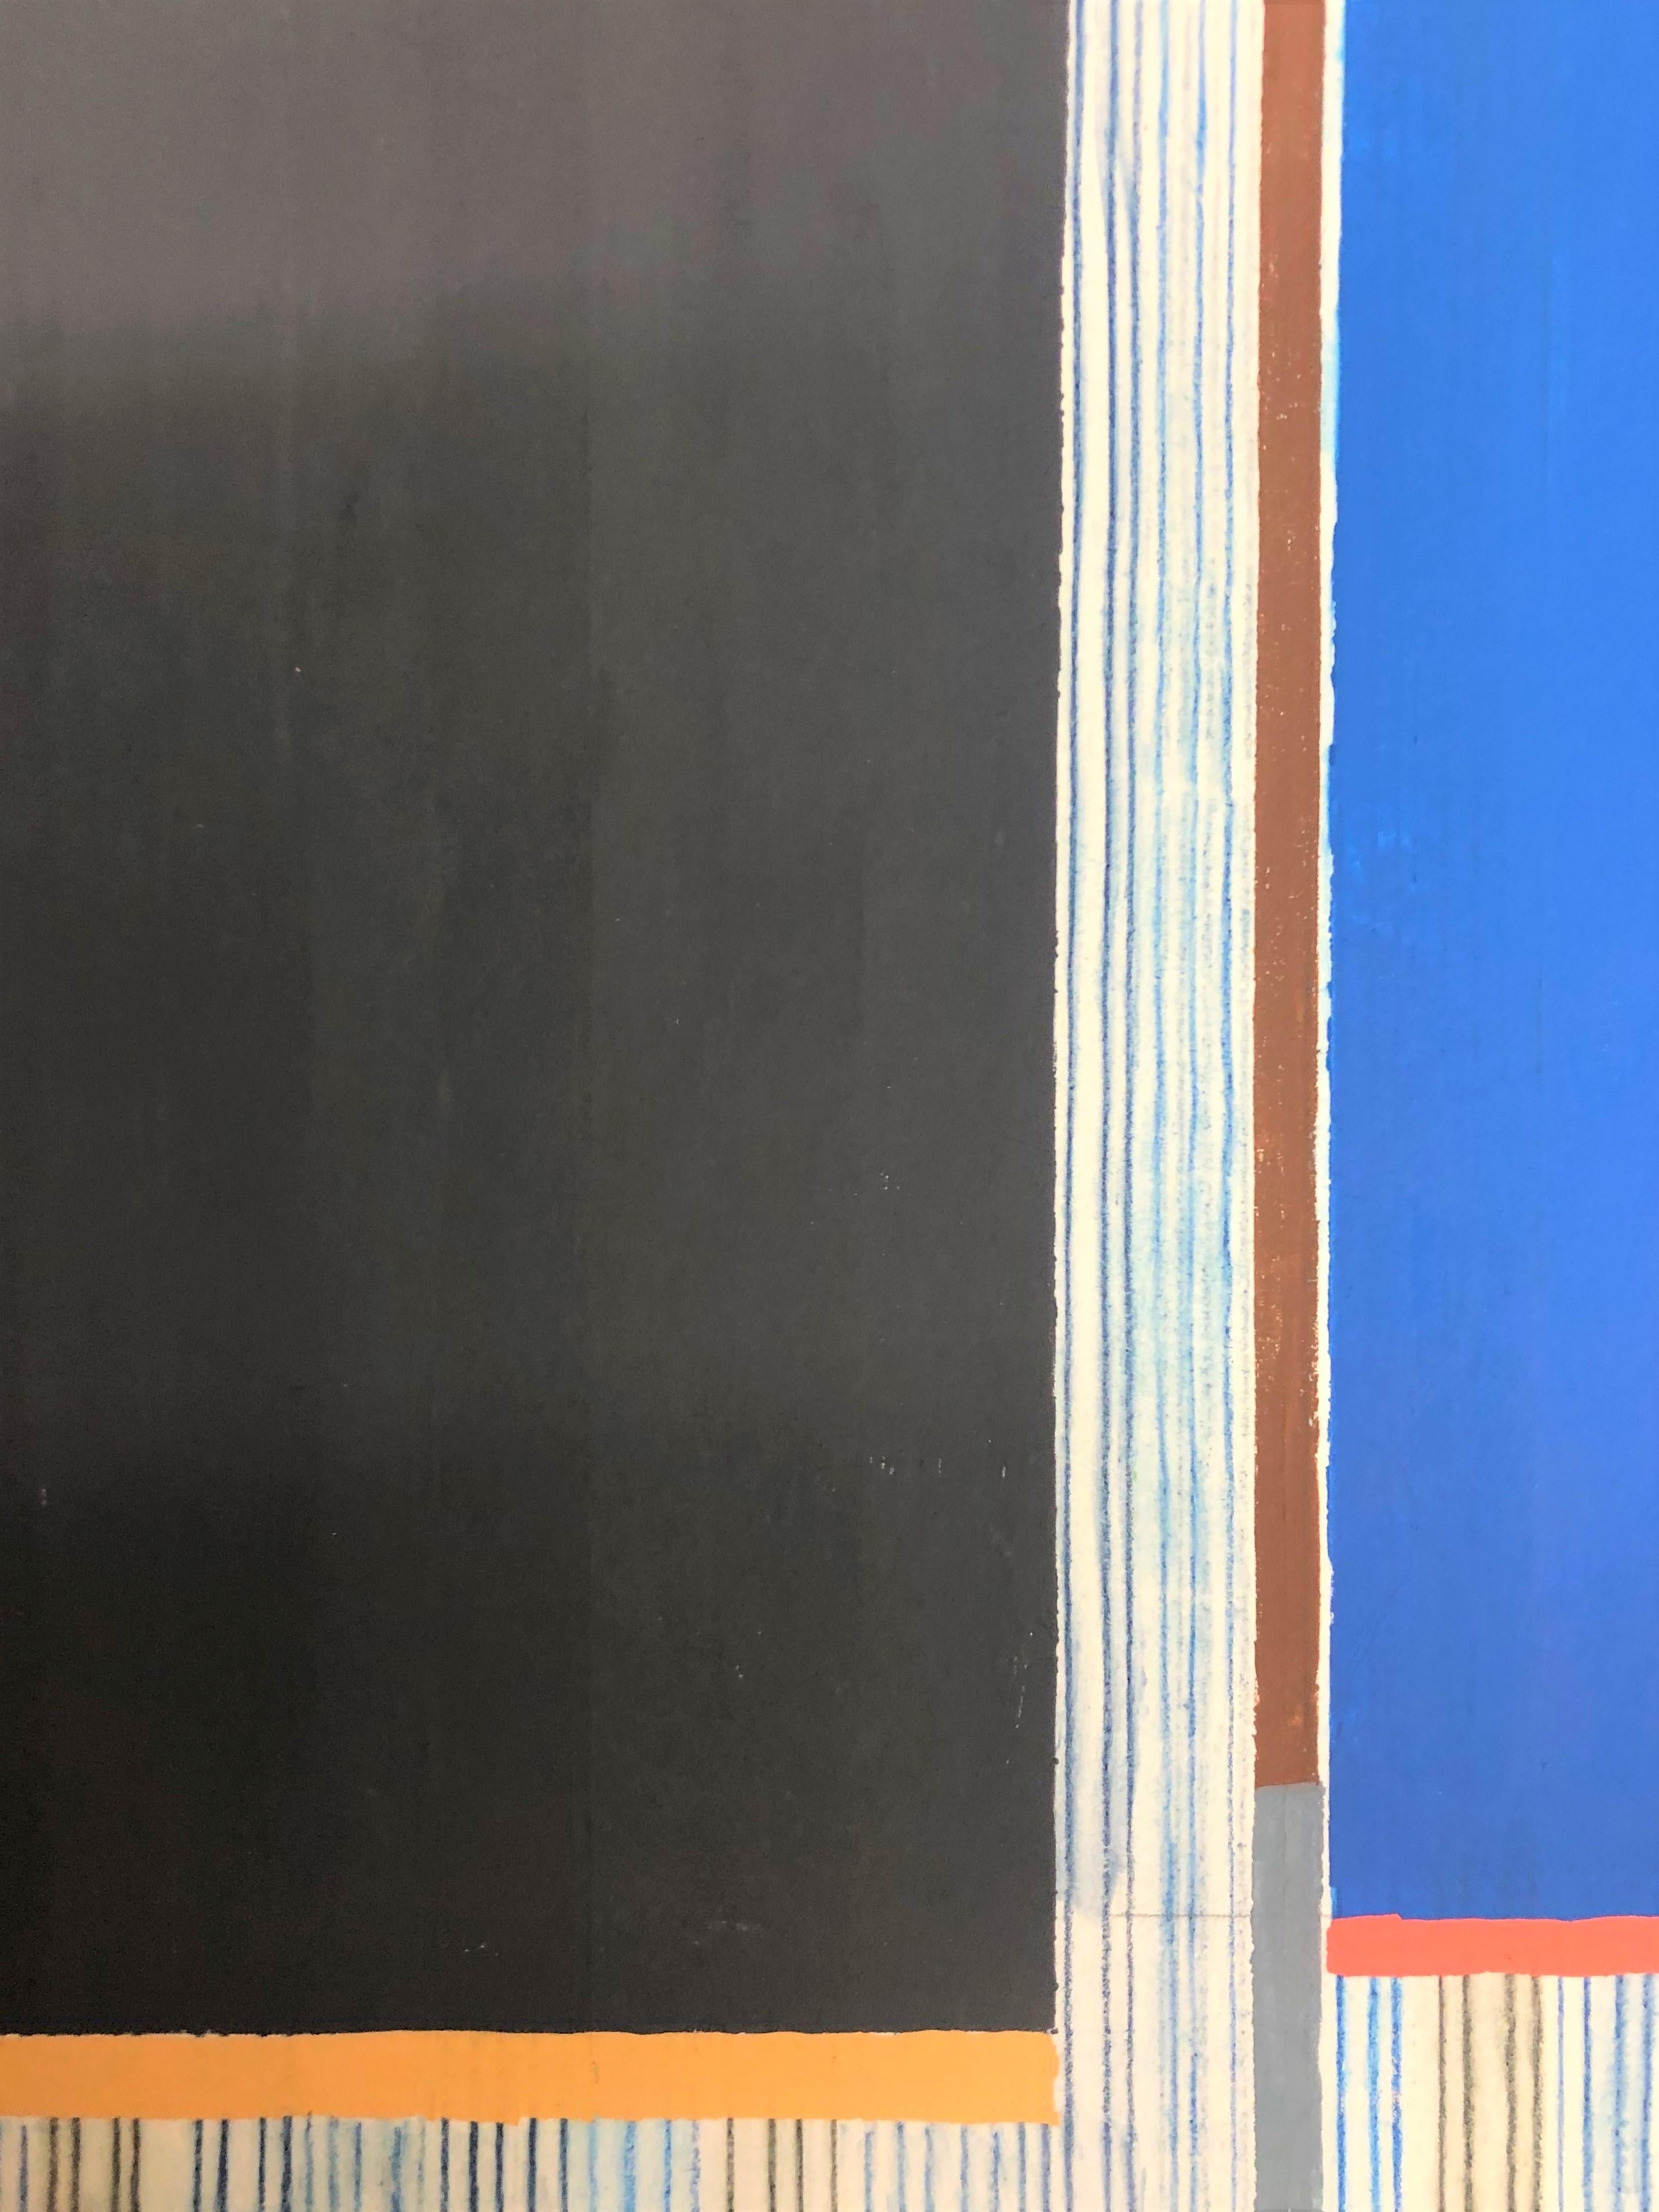 In this abstract painting in gouache, colored pencil, and graphite on paper by Elizabeth Gourlay, clean and precise, carefully ordered blocks of color in shades of blue, gray, blue, red, and gold are bright against the pale beige color of the paper.